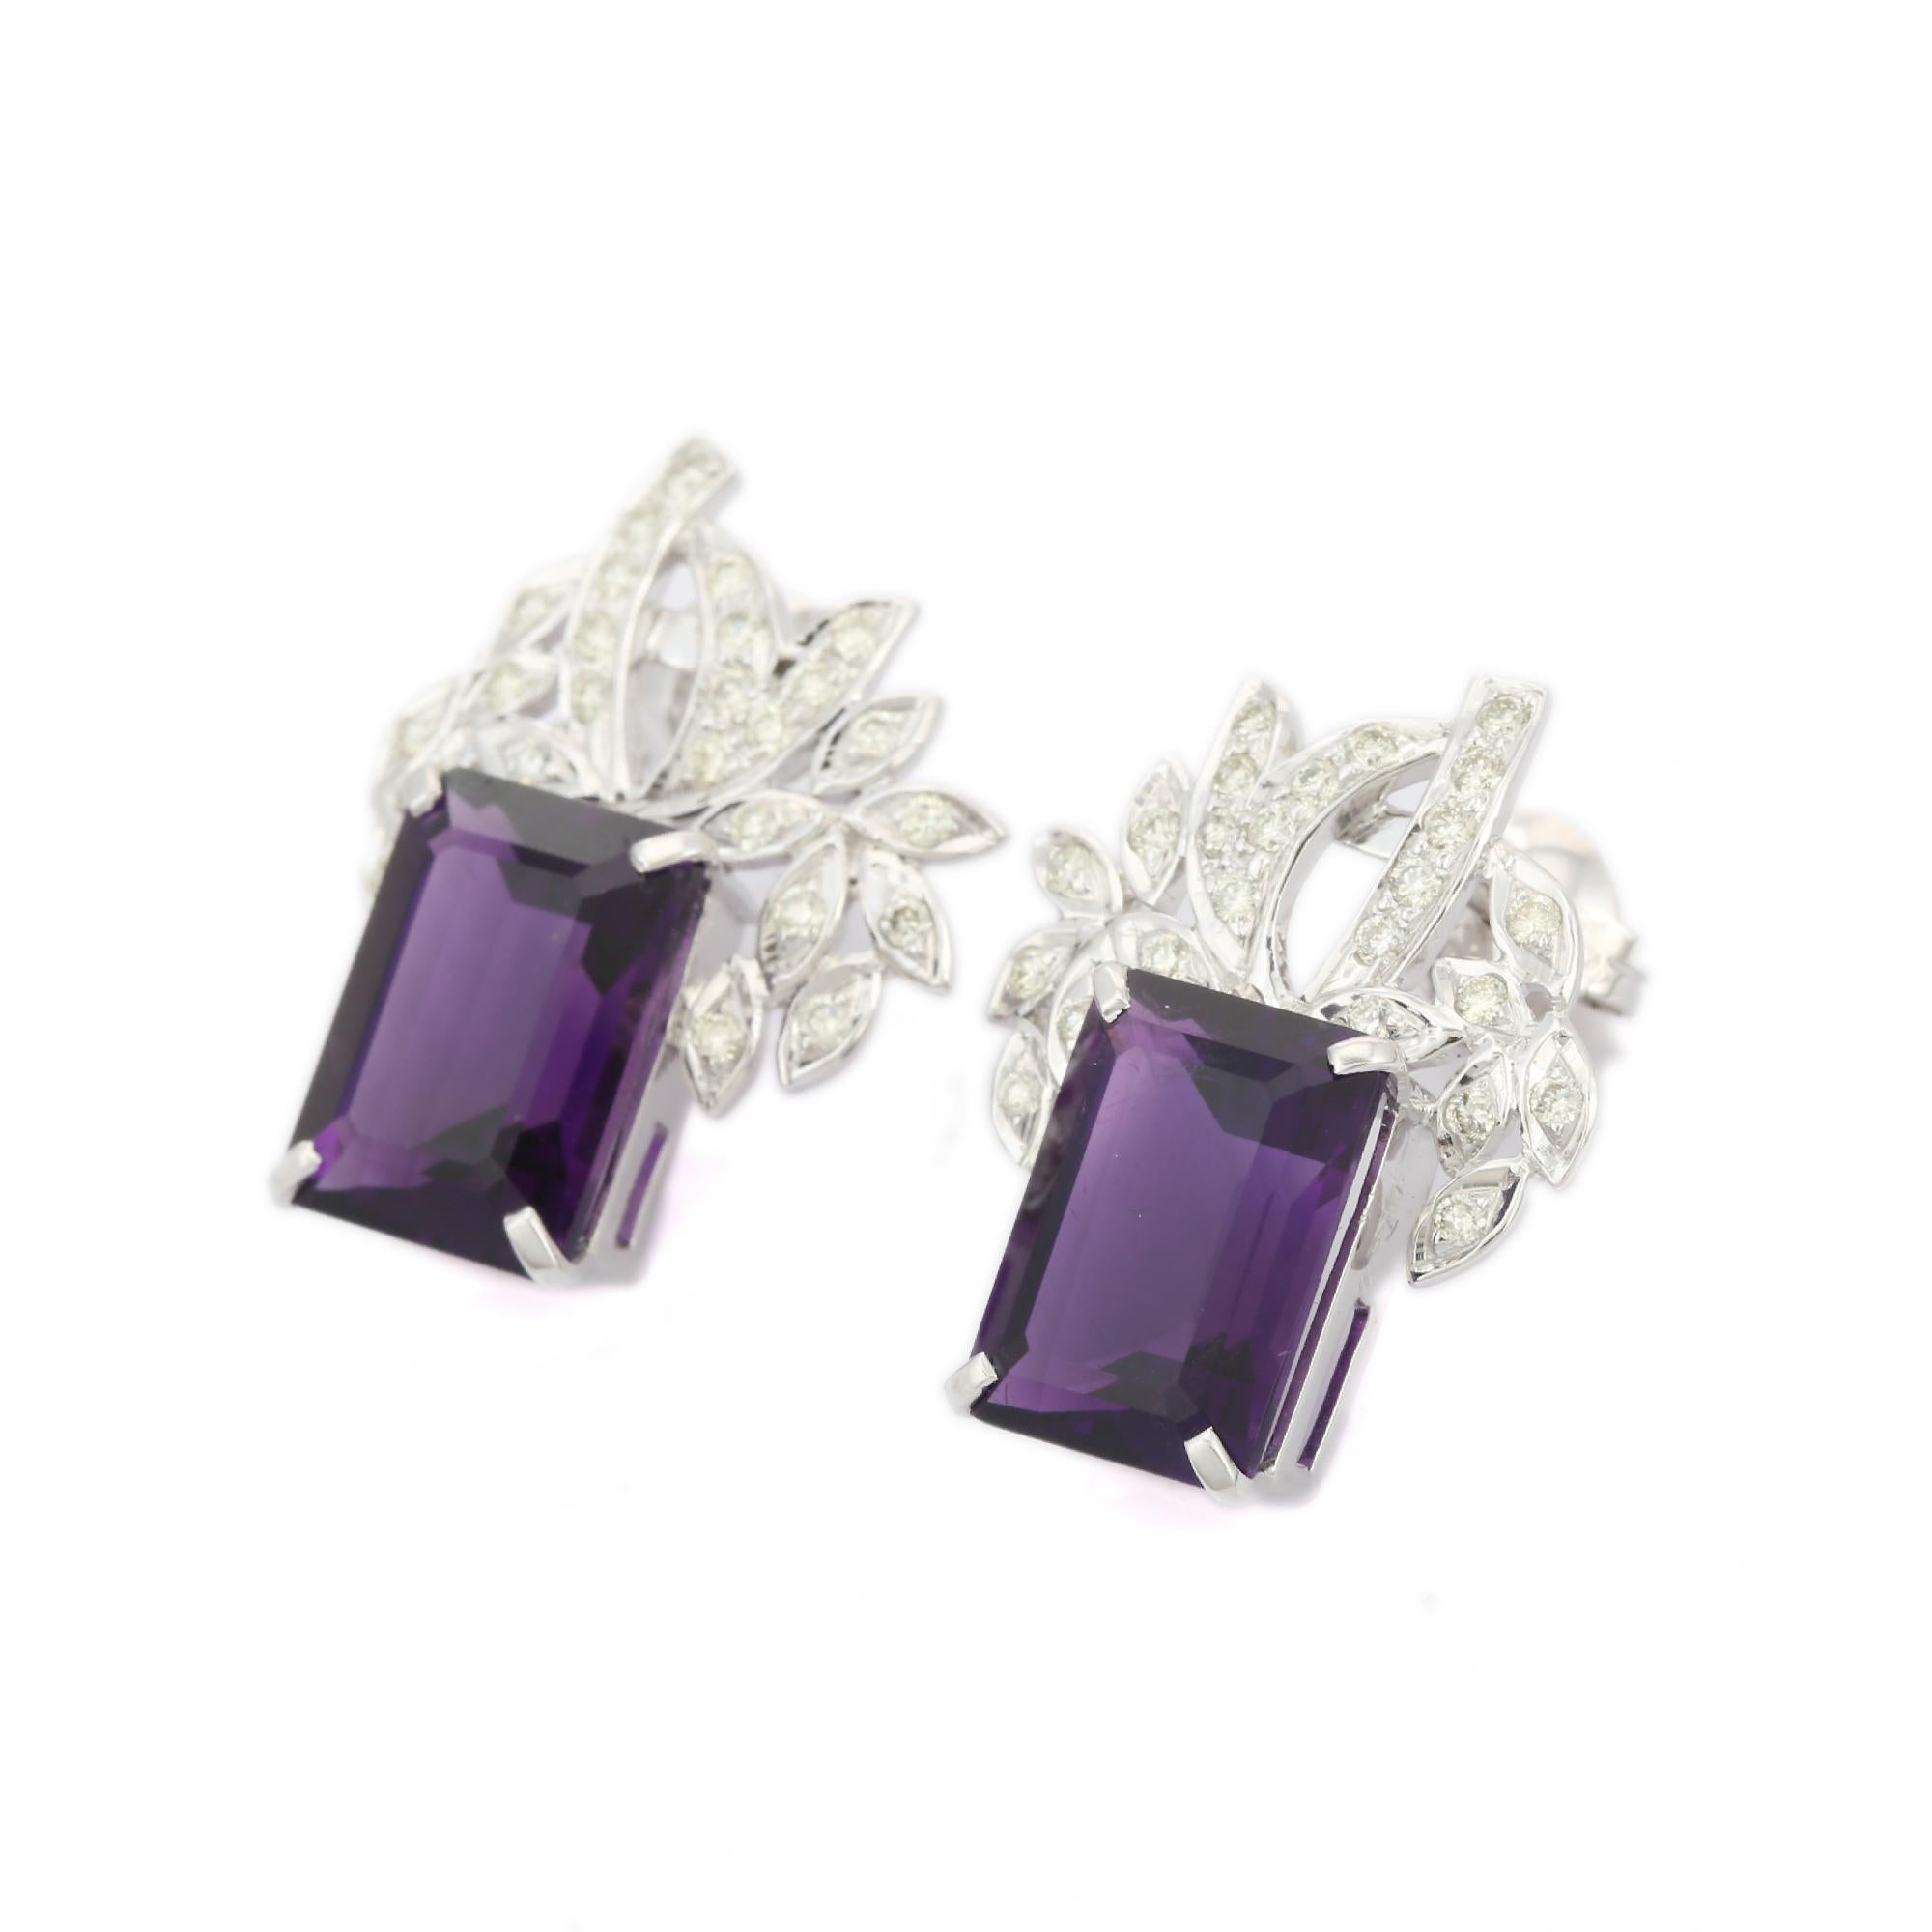 Statement Amethyst Diamond Stud Earrings in 18K Gold to make a statement with your look. You shall need stud earrings to make a statement with your look. These earrings create a sparkling, luxurious look featuring octagon cut amethyst.
Amethyst